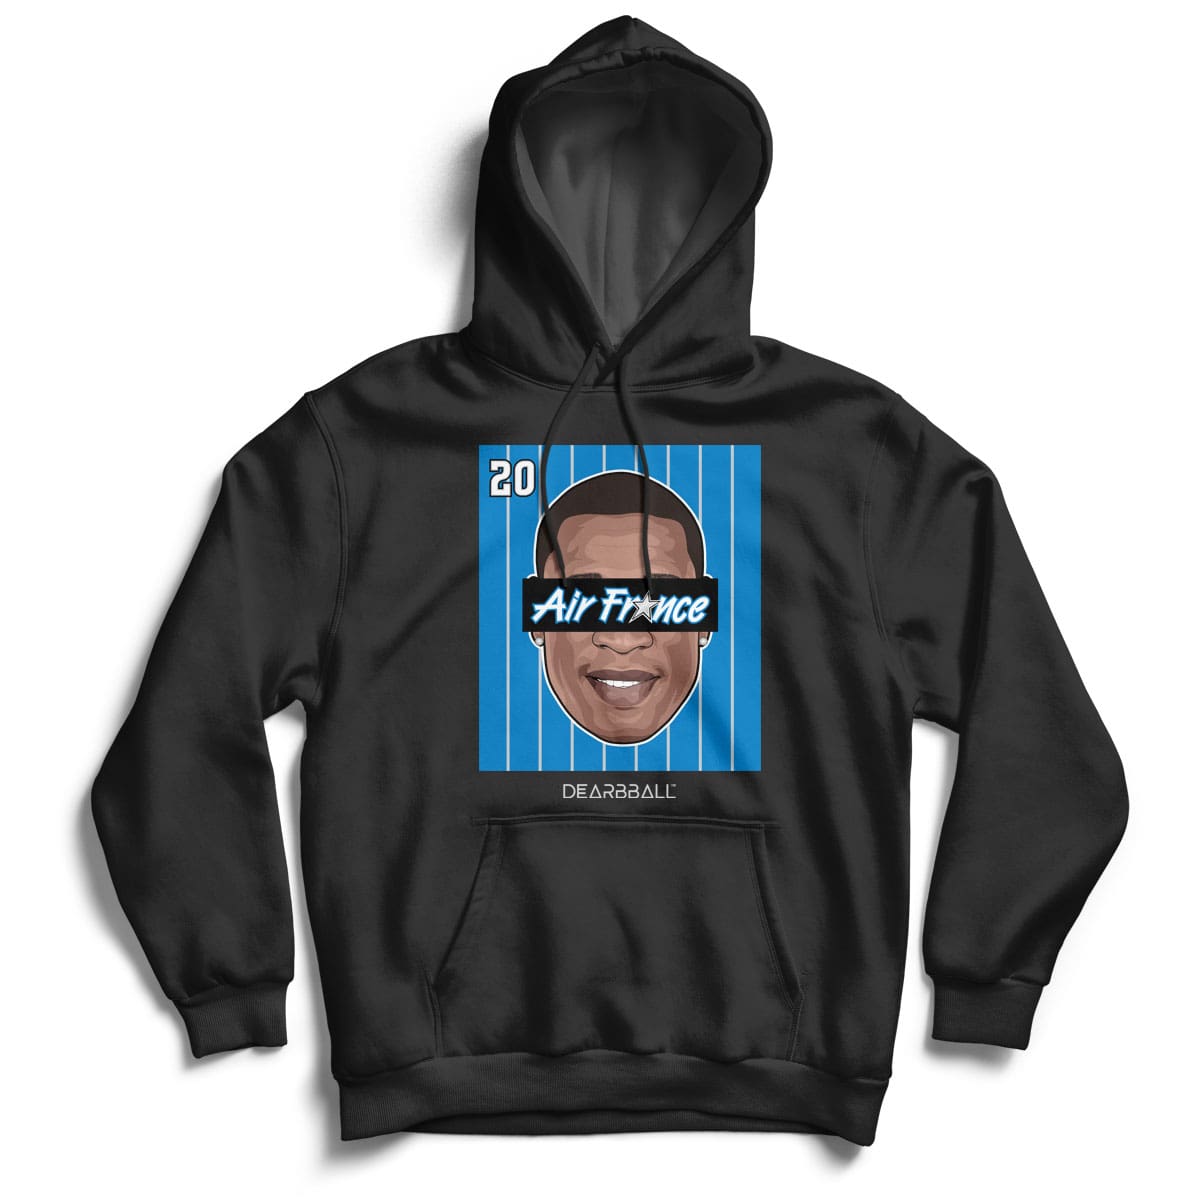 DearBBall Hoodie - AirFrance 20 Orlando Throwback Edition